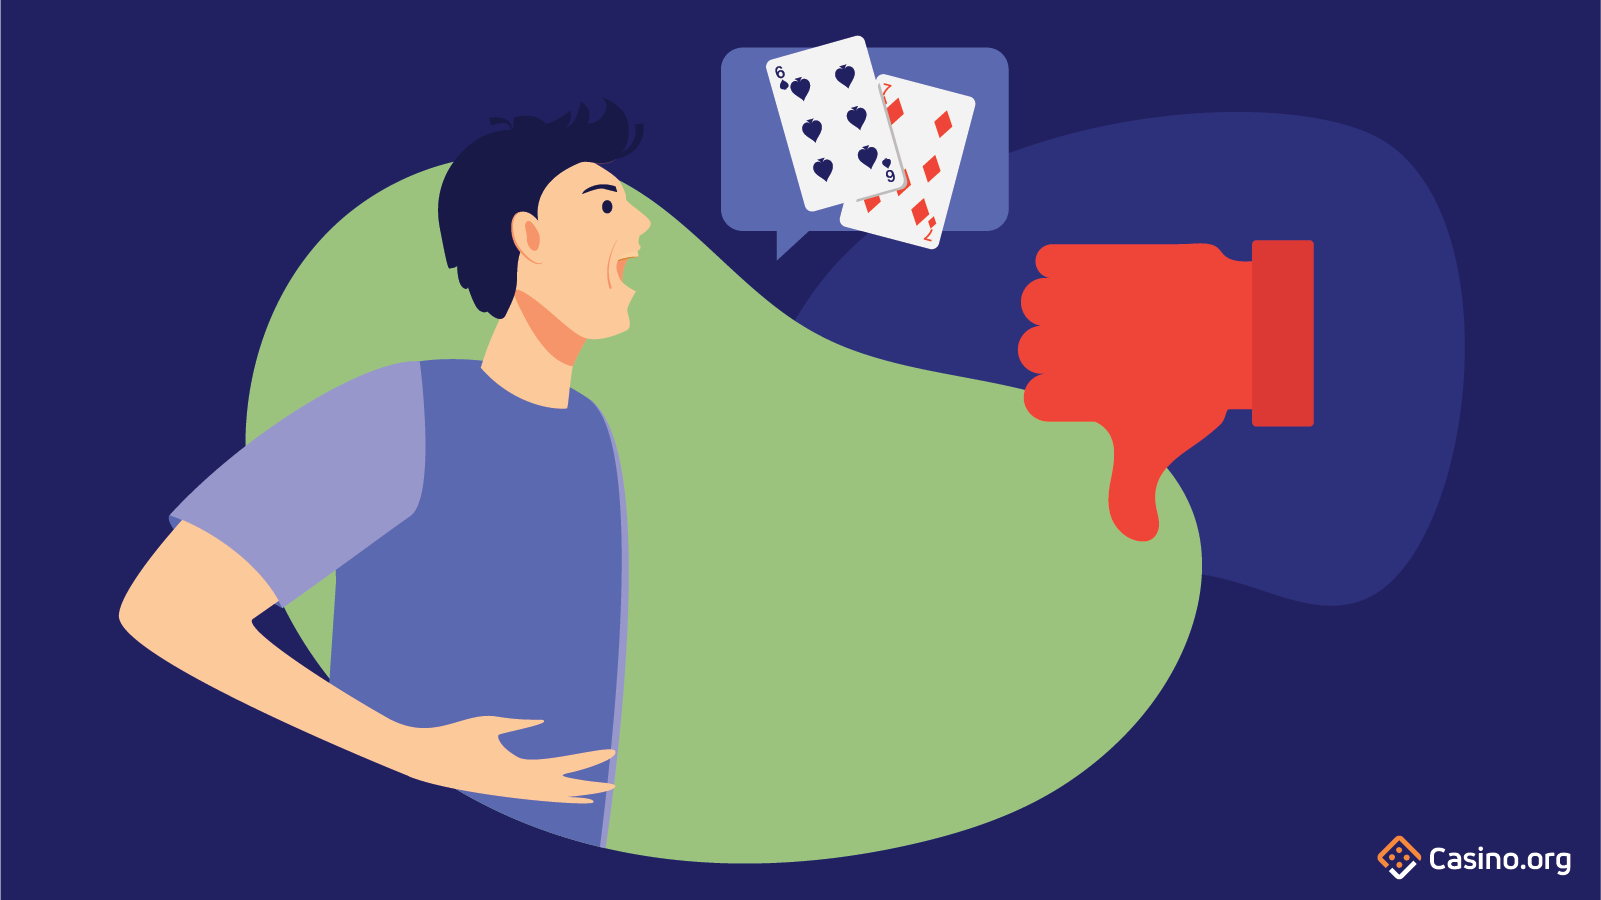 Someone declaring their poker hand, with a red thumb pointing down.